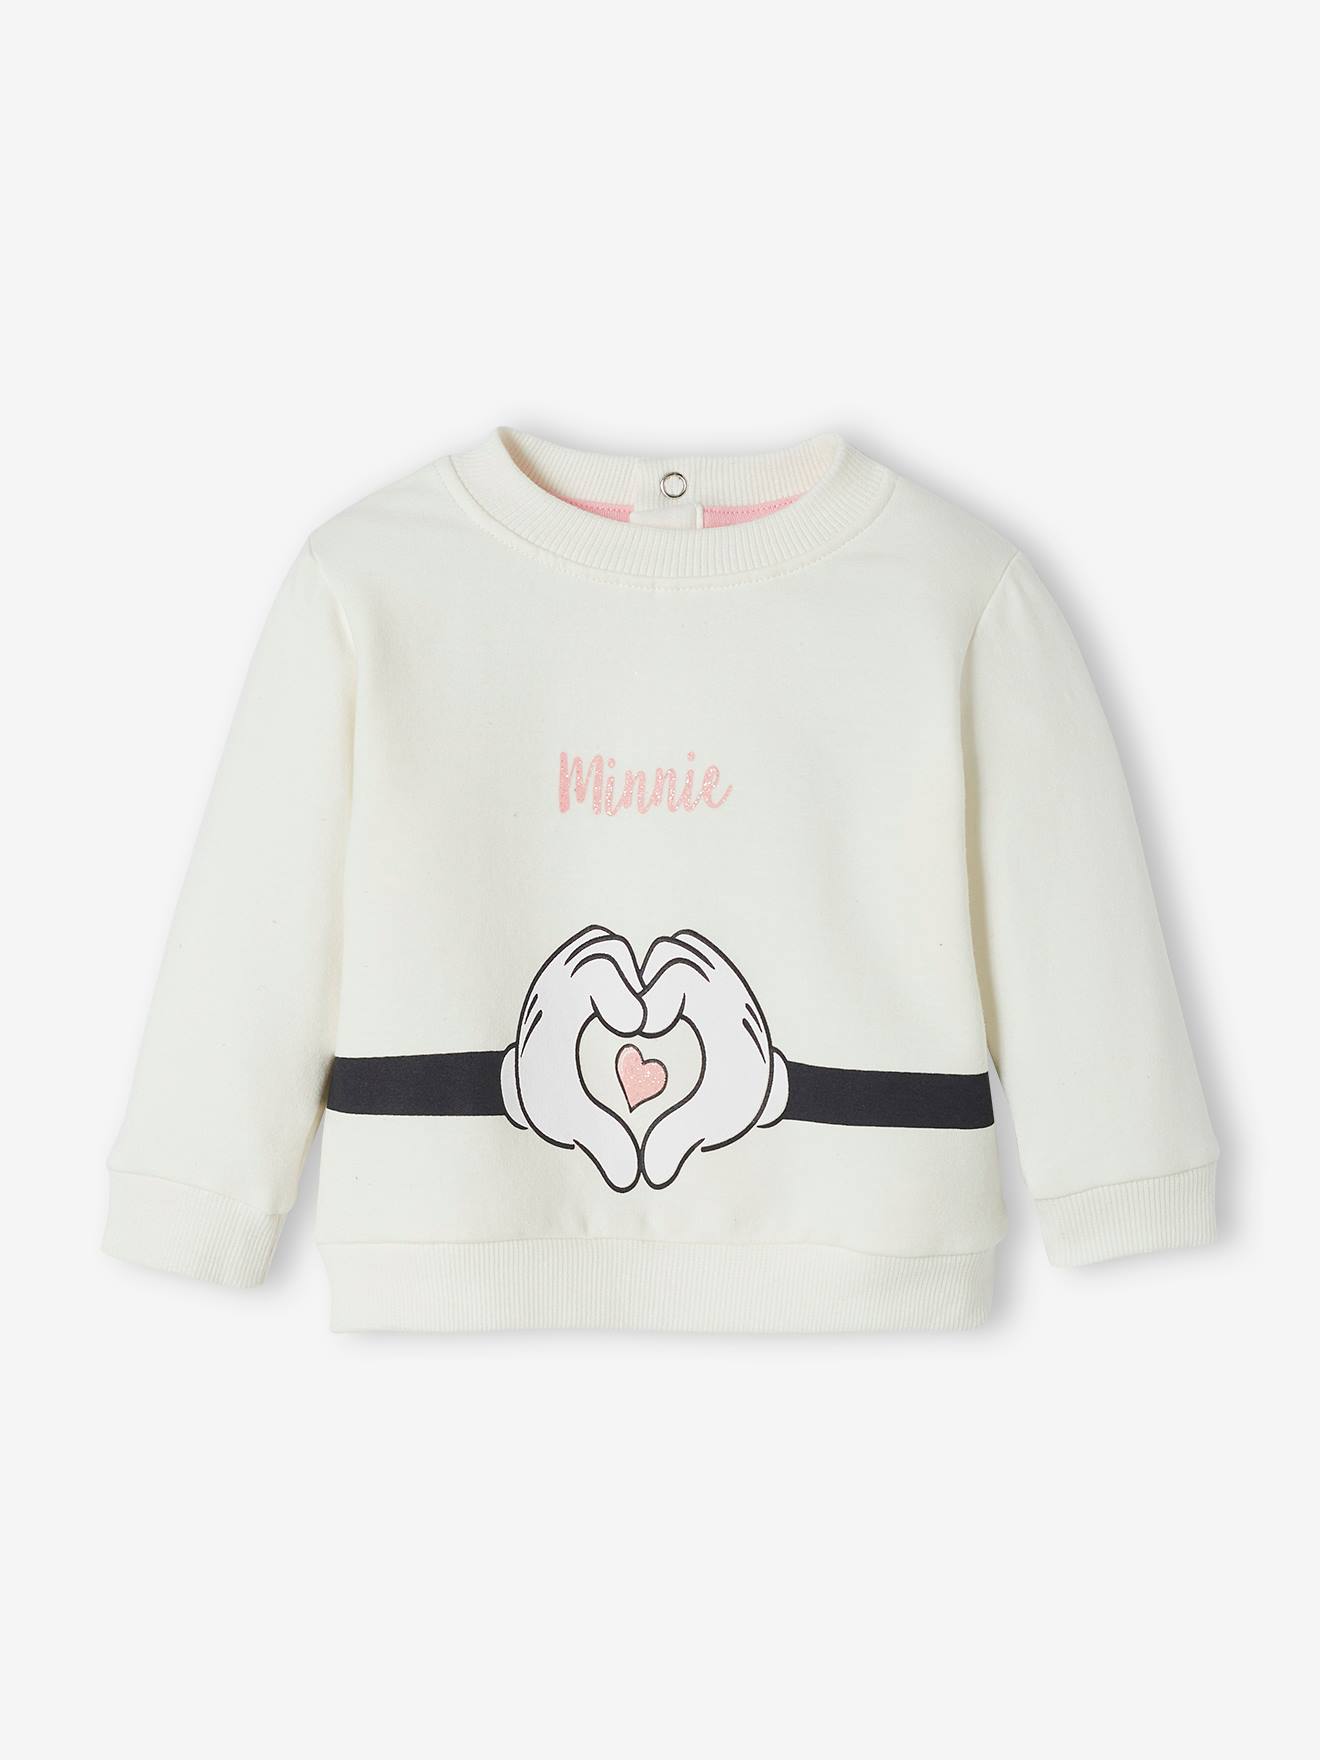 Sweatshirt for Baby Girls, Minnie Mouse by Disney(r)